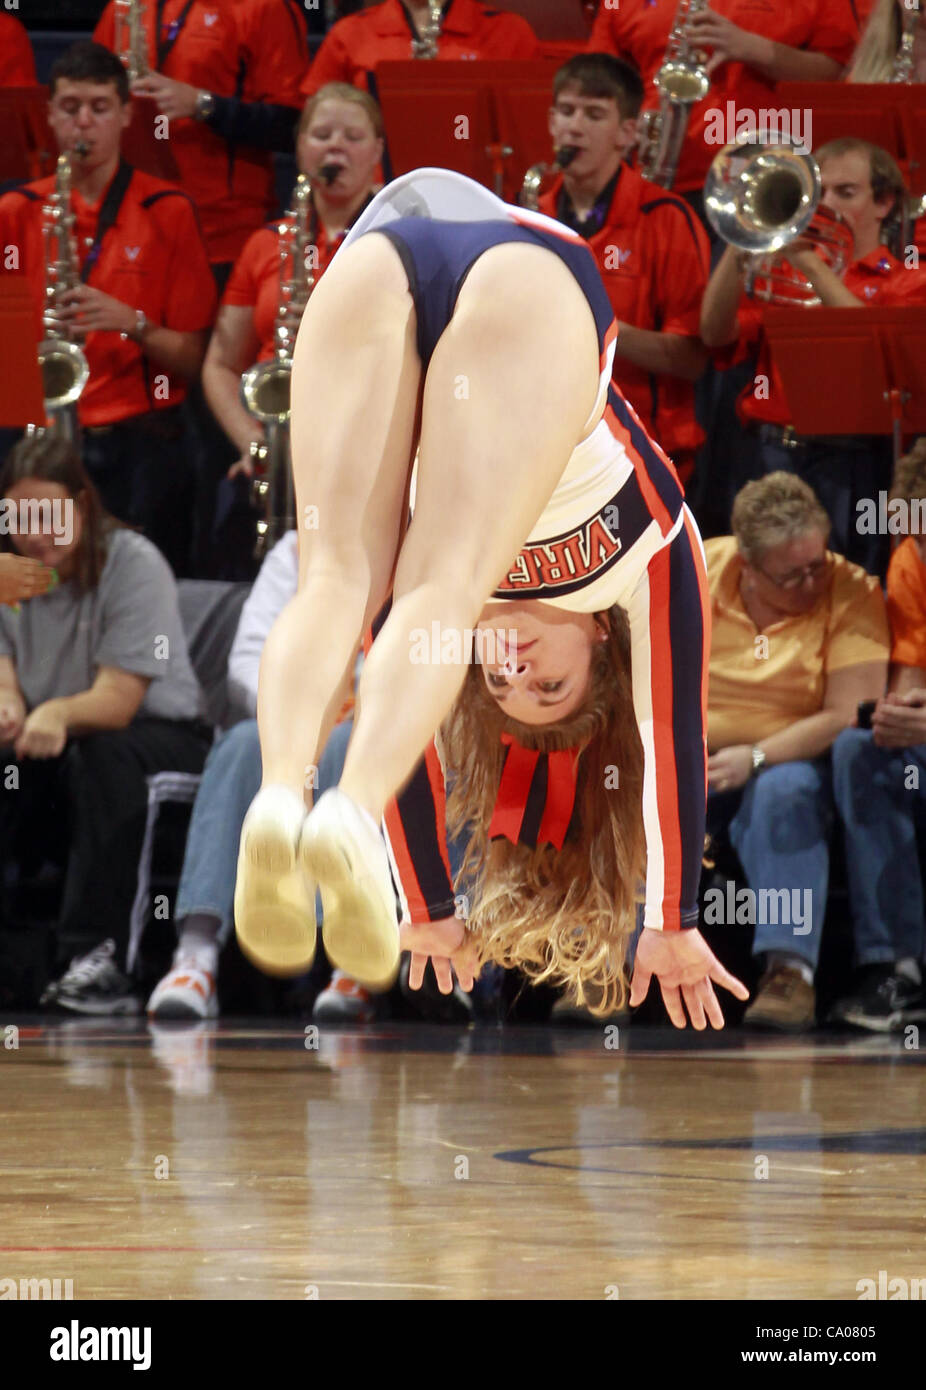 Nov. 20, 2011 - Charlottesville, Virginia, United States - Virginia Cavaliers cheerleaders tumble across the floor during the game on November 20, 2011 against the Tennessee Lady Volunteers at the John Paul Jones Arena in Charlottesville, Virginia. Virginia defeated Tennessee in overtime 69-64. (Cre Stock Photo